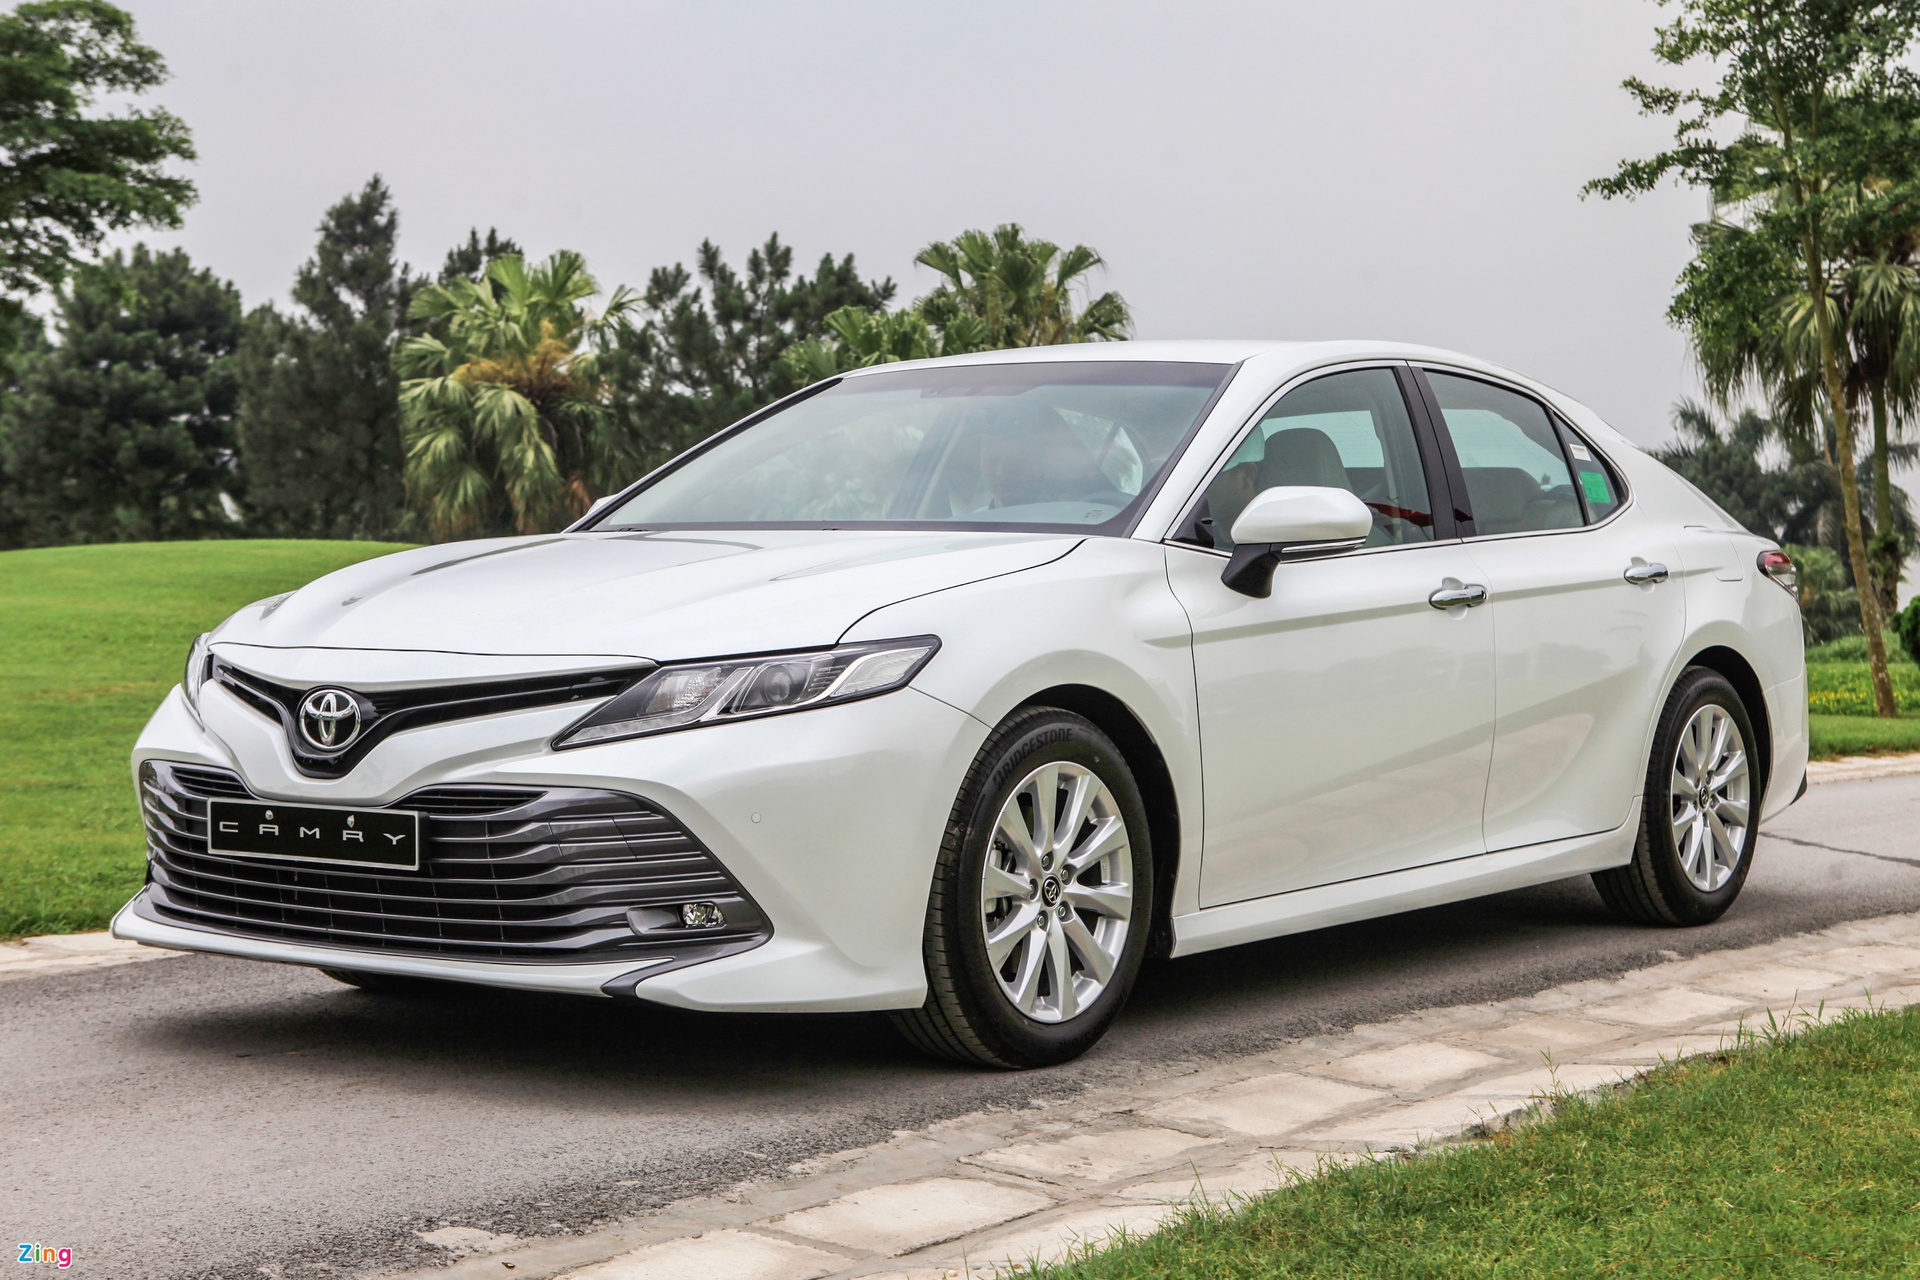 VinFast Lux A2.0 canh tranh Toyota Camry anh 2